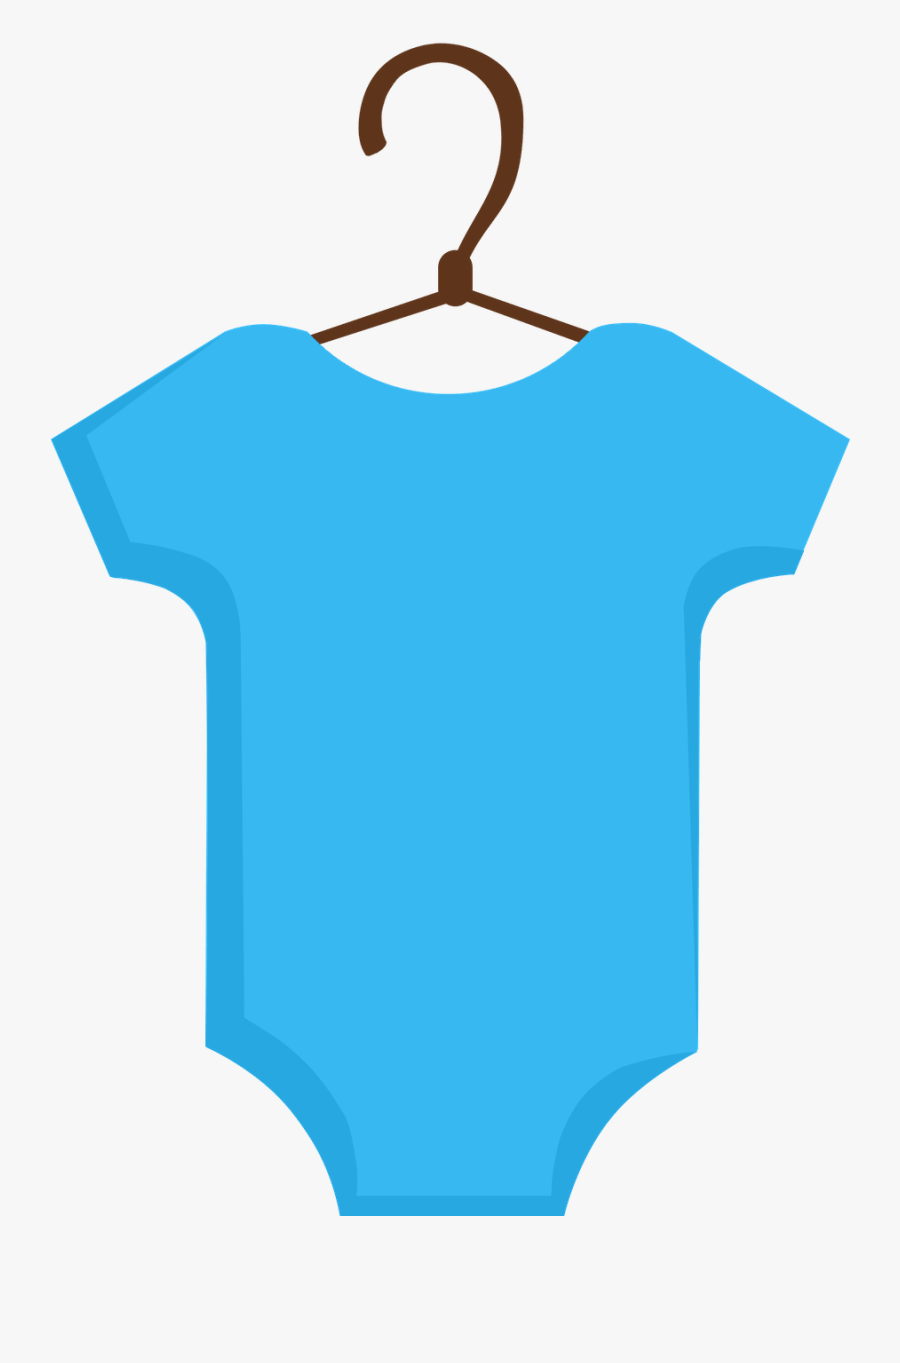 Baby Onesie Red Clipart, Transparent Clipart